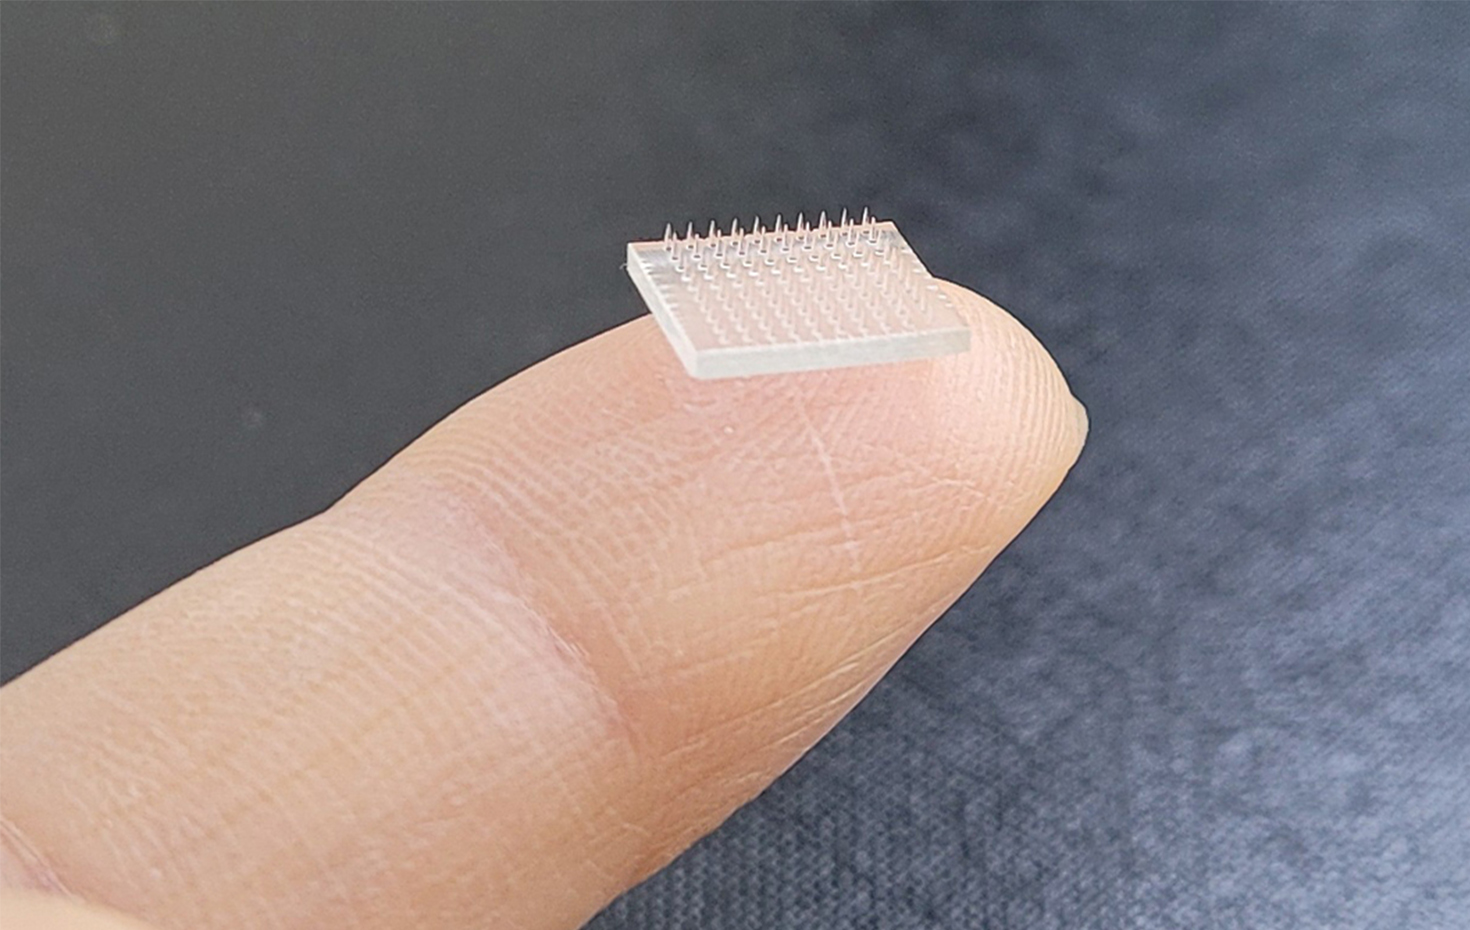 3D printed vaccine patch